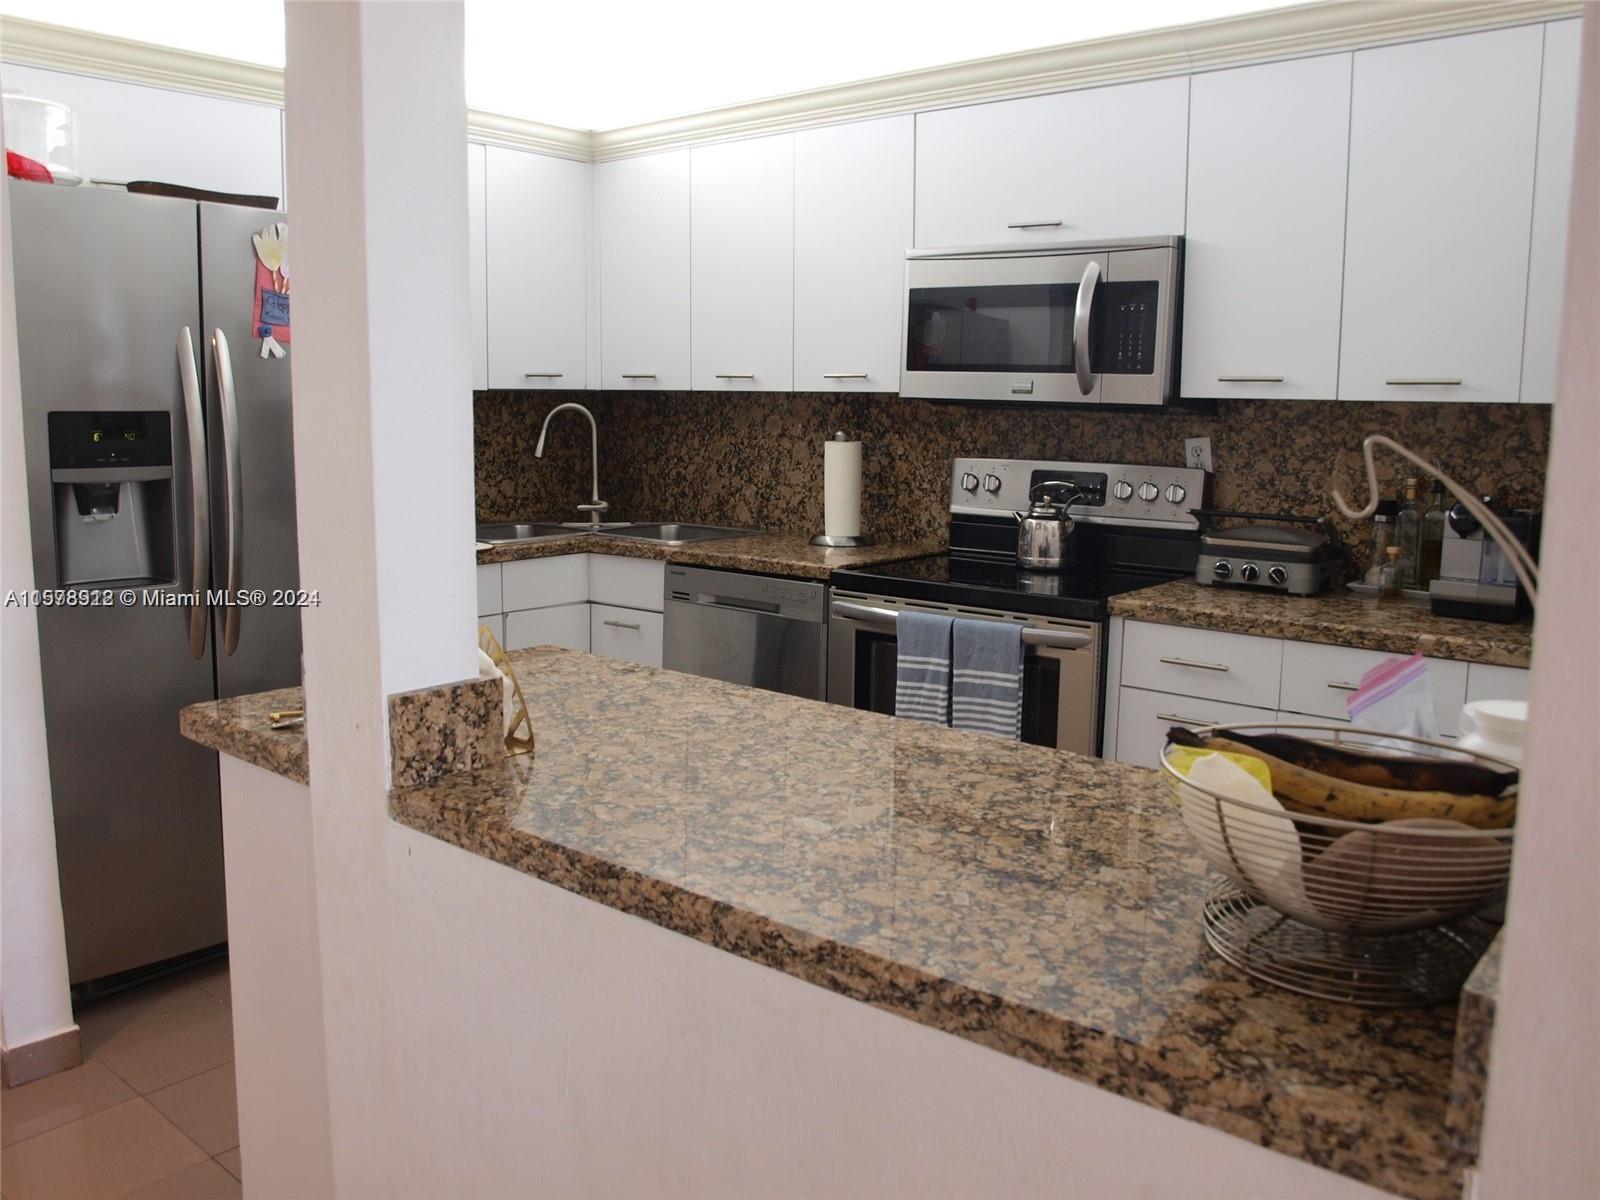 a kitchen with stainless steel appliances granite countertop a stove refrigerator and a microwave